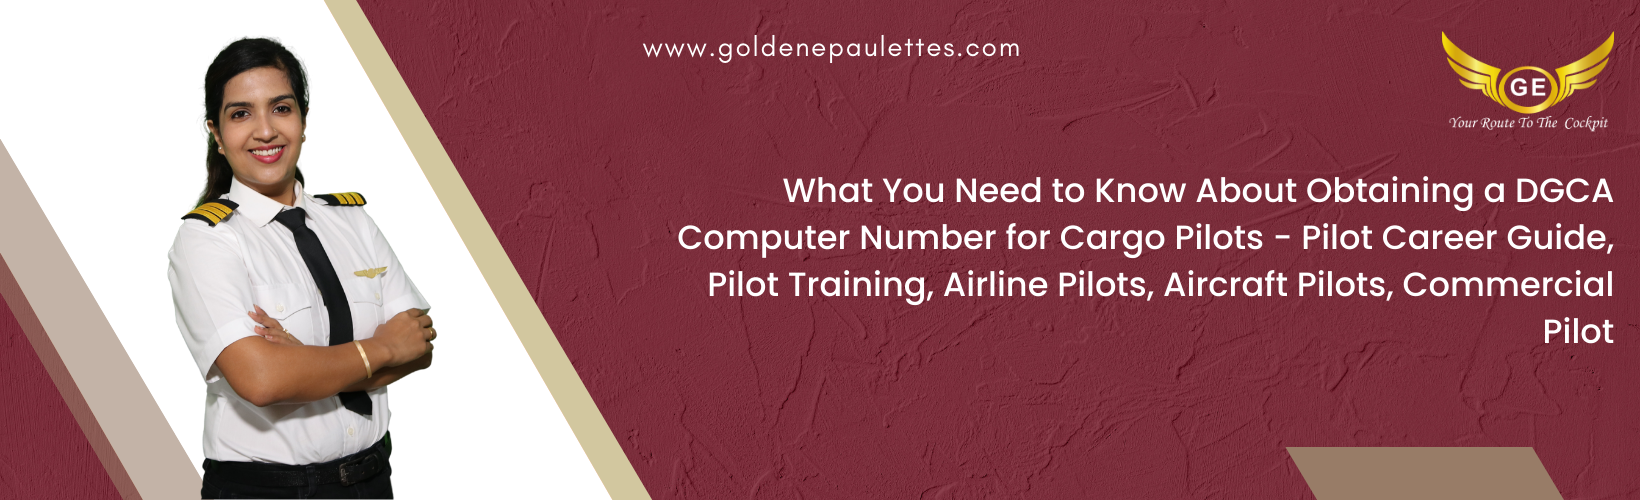 What You Need to Know About Obtaining a DGCA Computer Number for Cargo Pilots